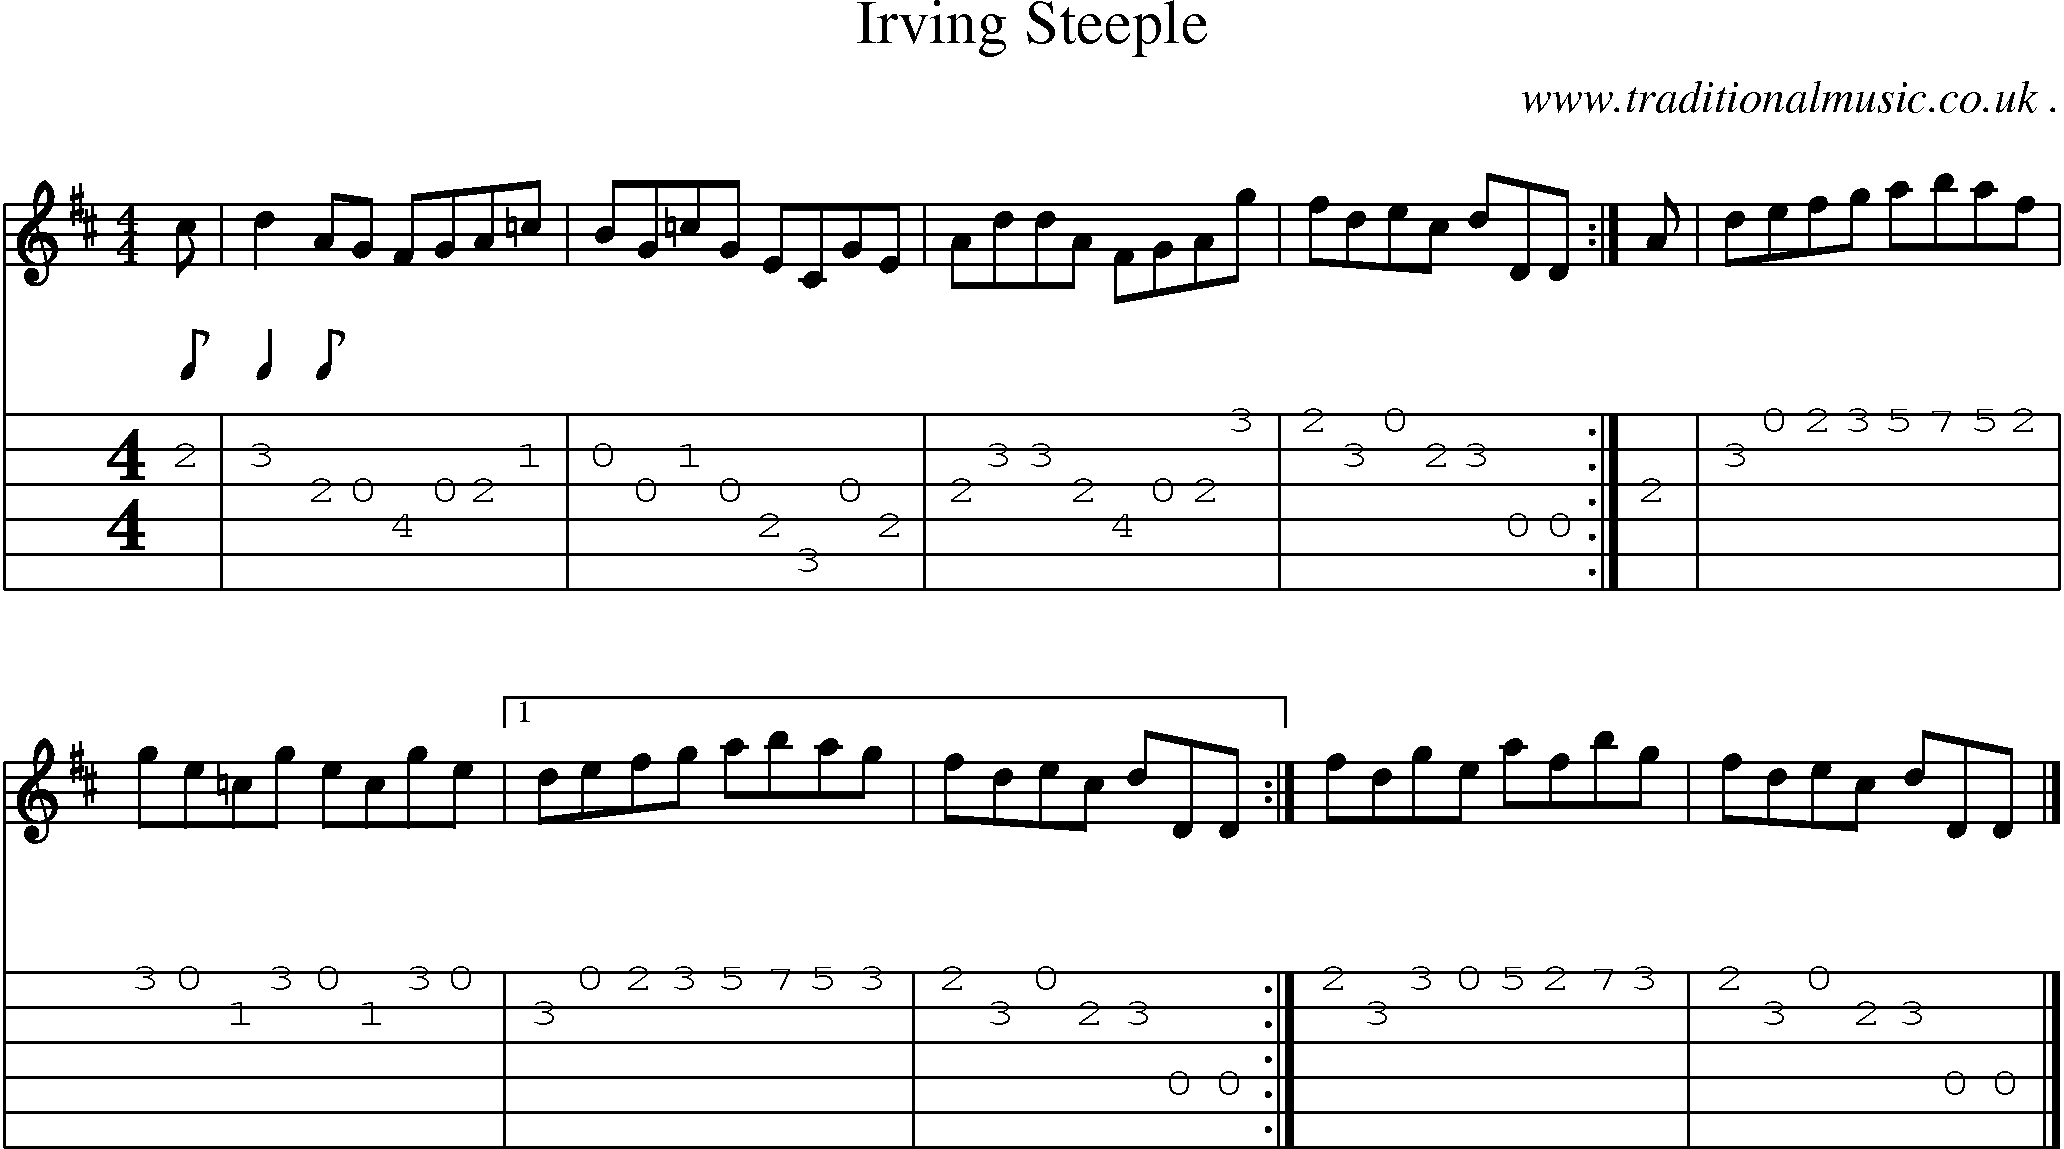 Sheet-music  score, Chords and Guitar Tabs for Irving Steeple